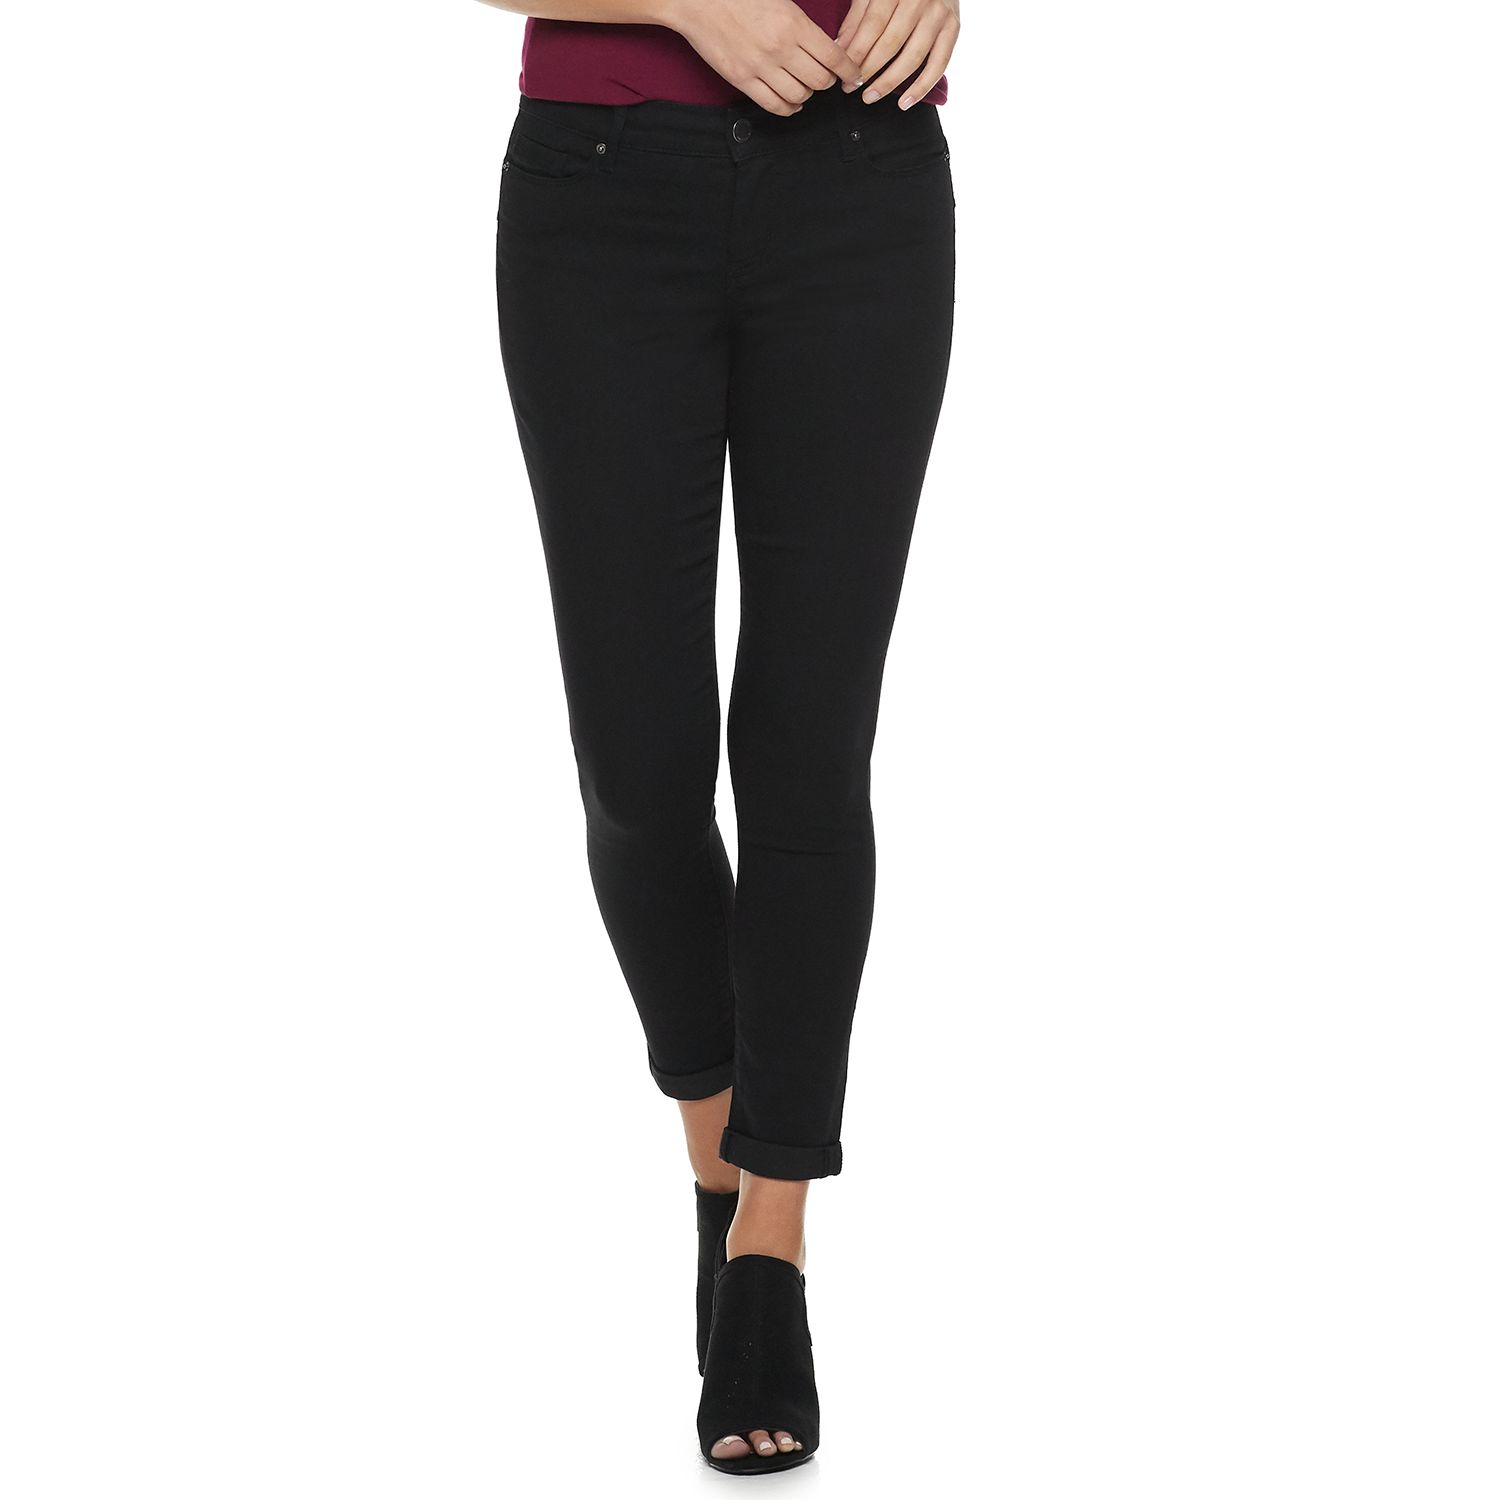 juicy couture skinny jeans